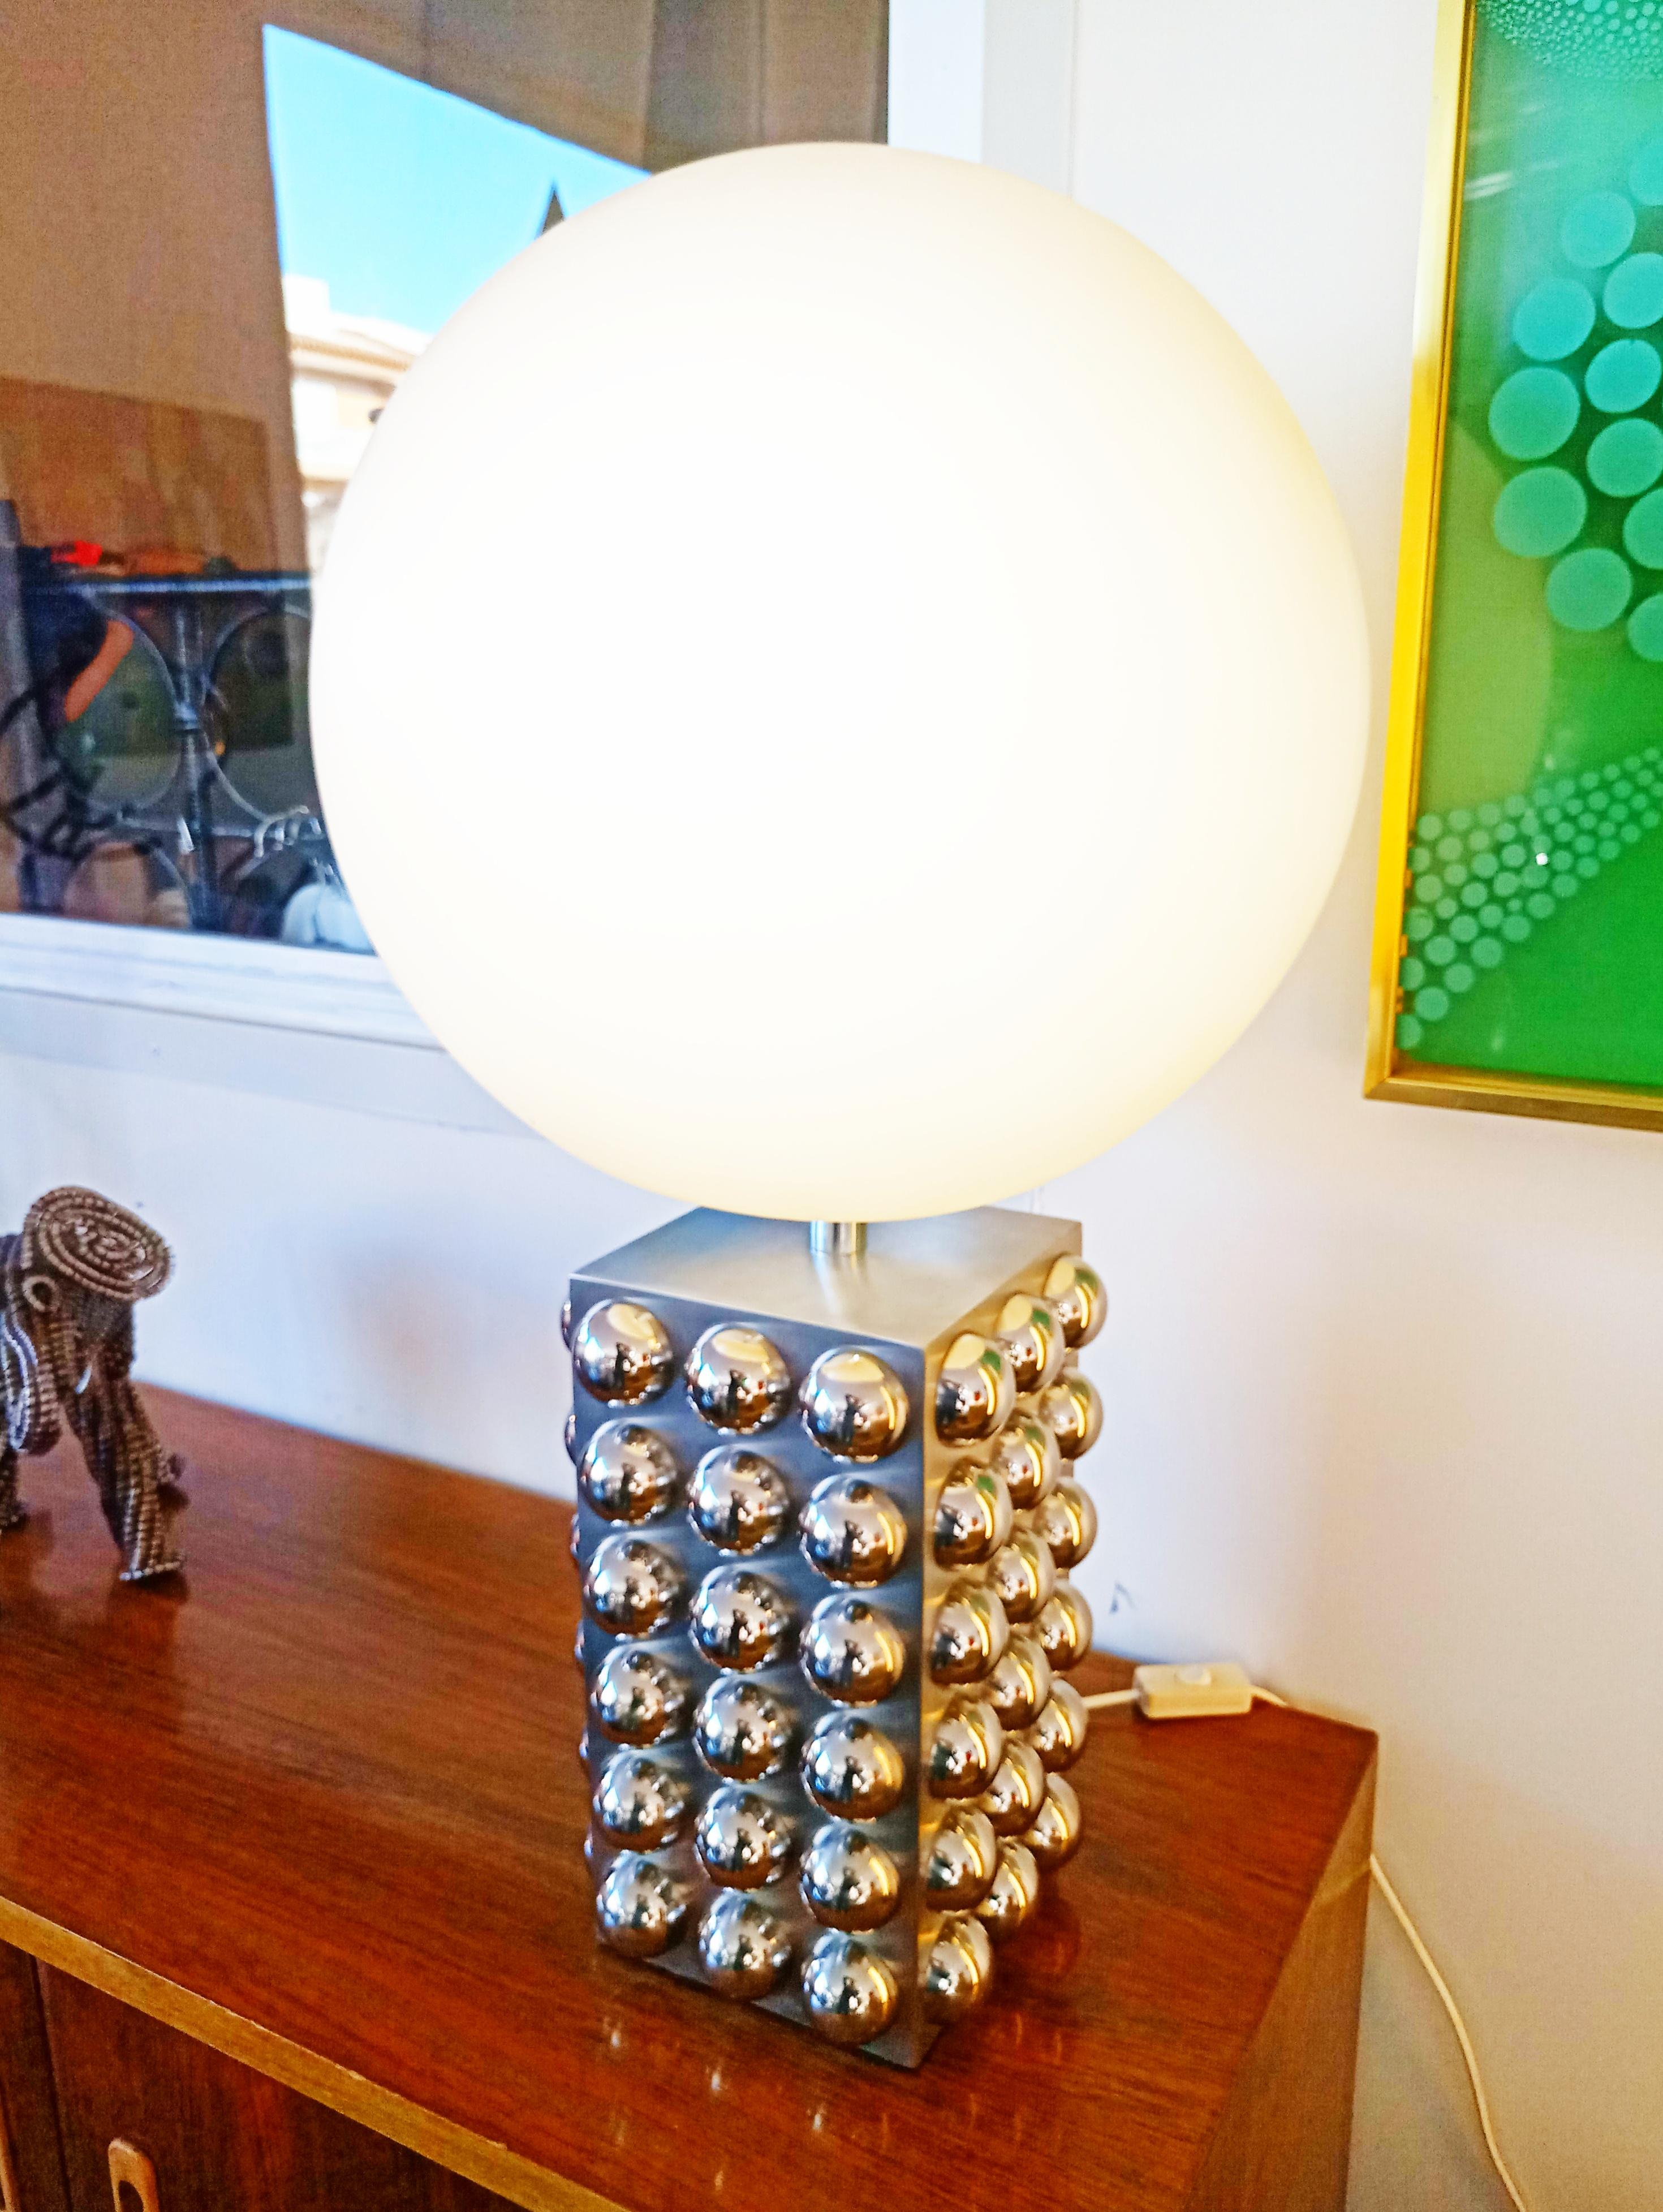 Rare and beautiful large bubble chrome table lamp manufactured in France in 1970s. In perfect vintage condition.